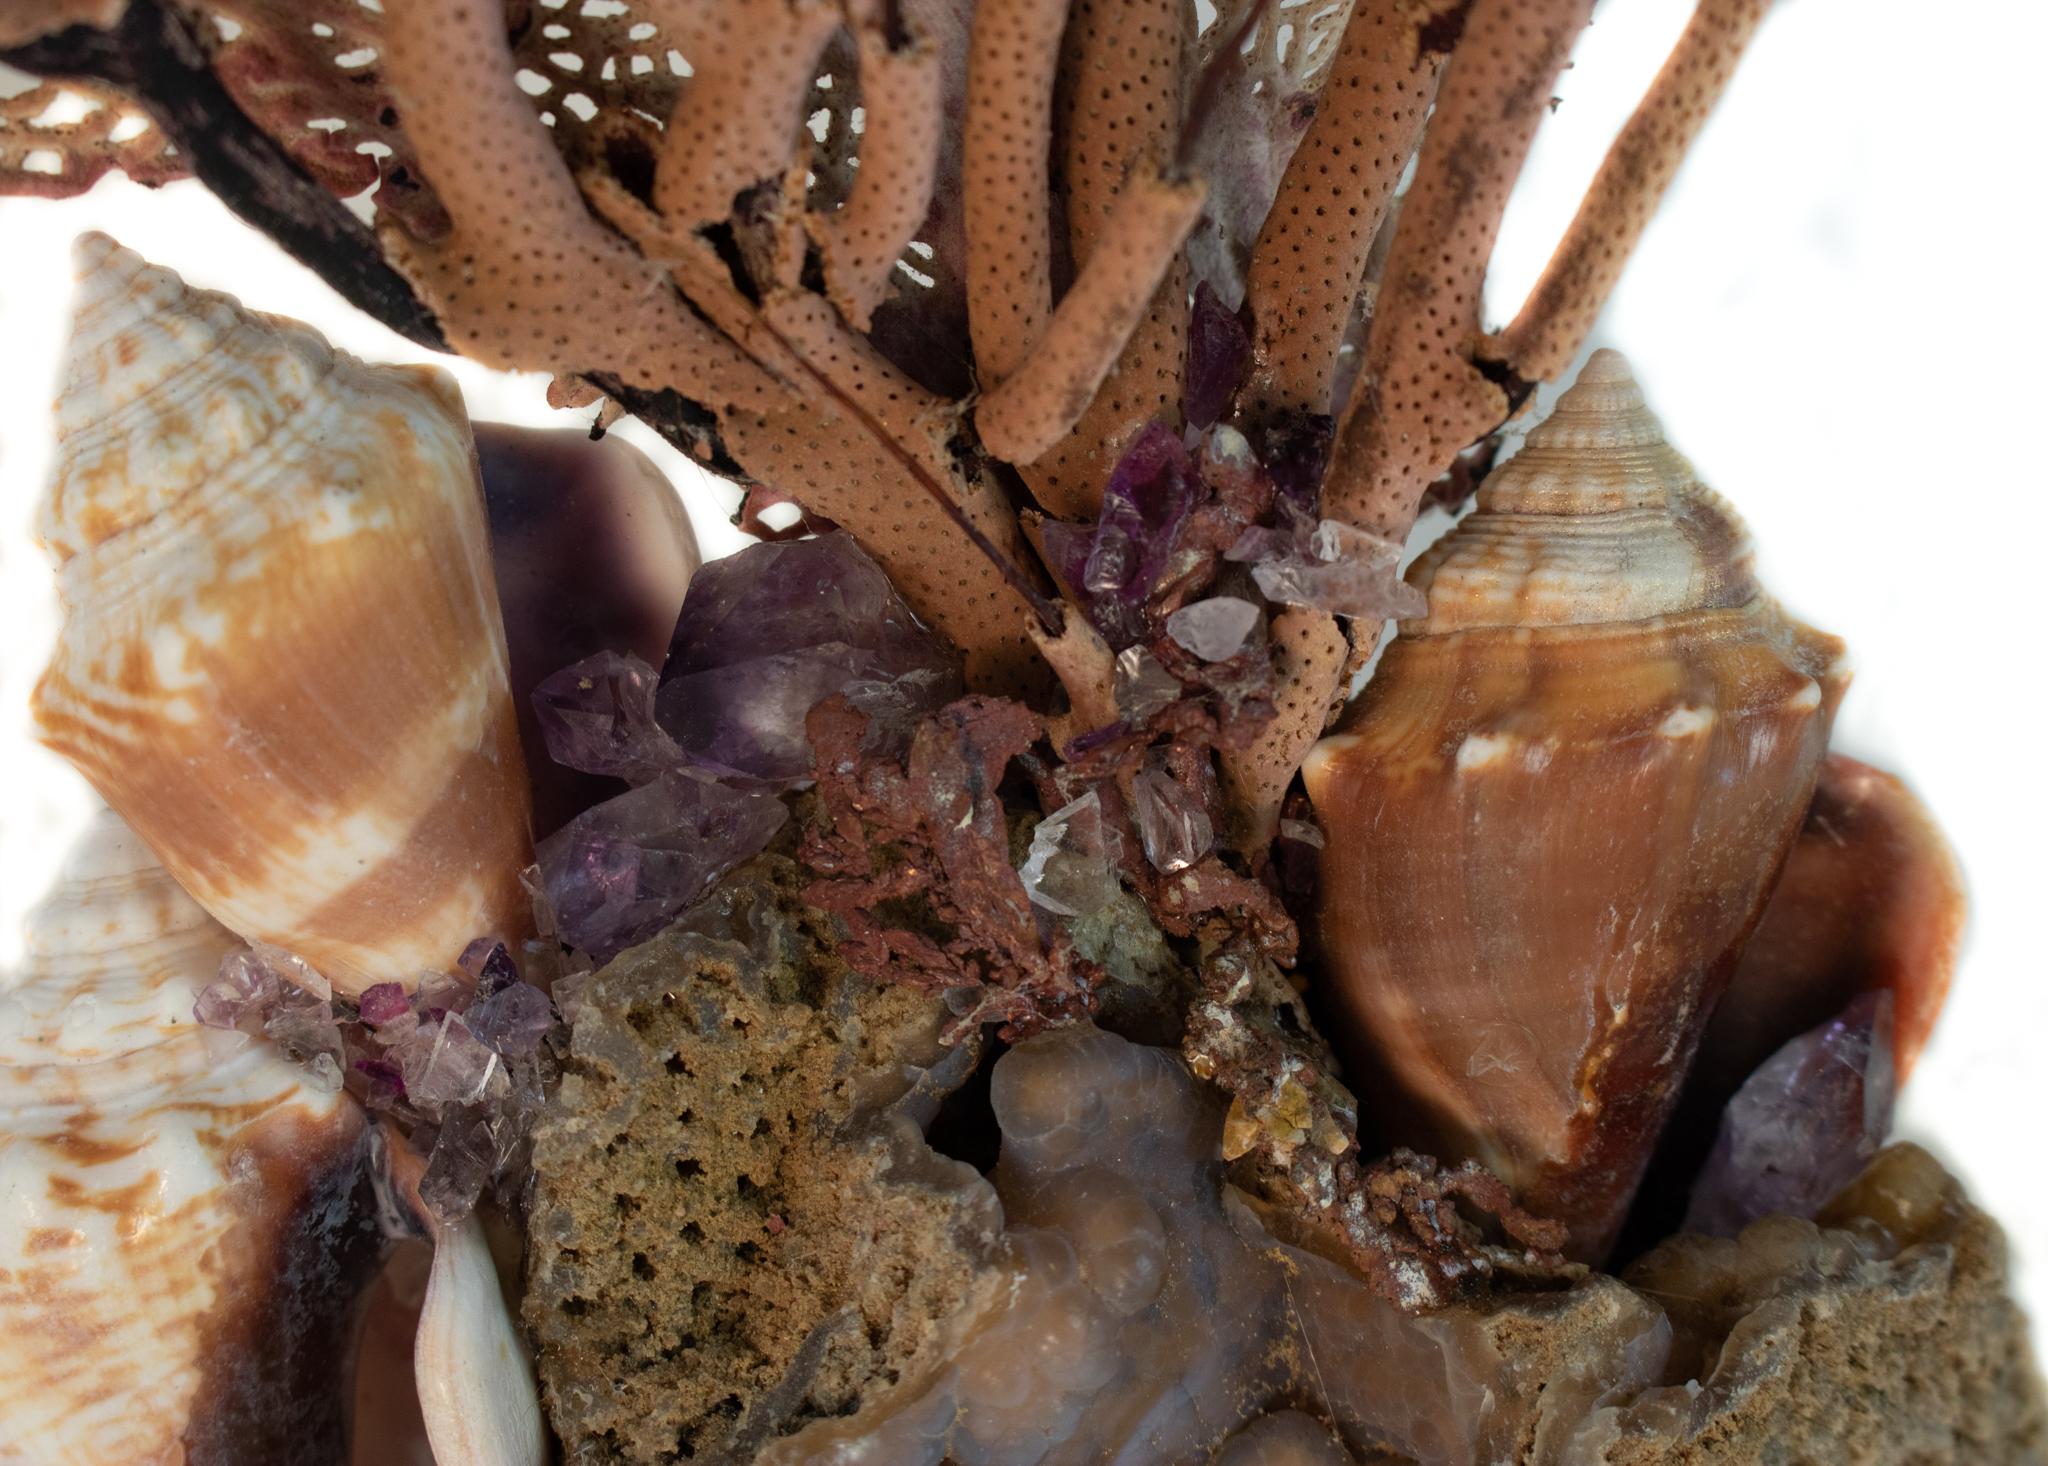 American Sculptural Sea Fan with Amethyst and Shells on Agatized Coral and Lucite Base